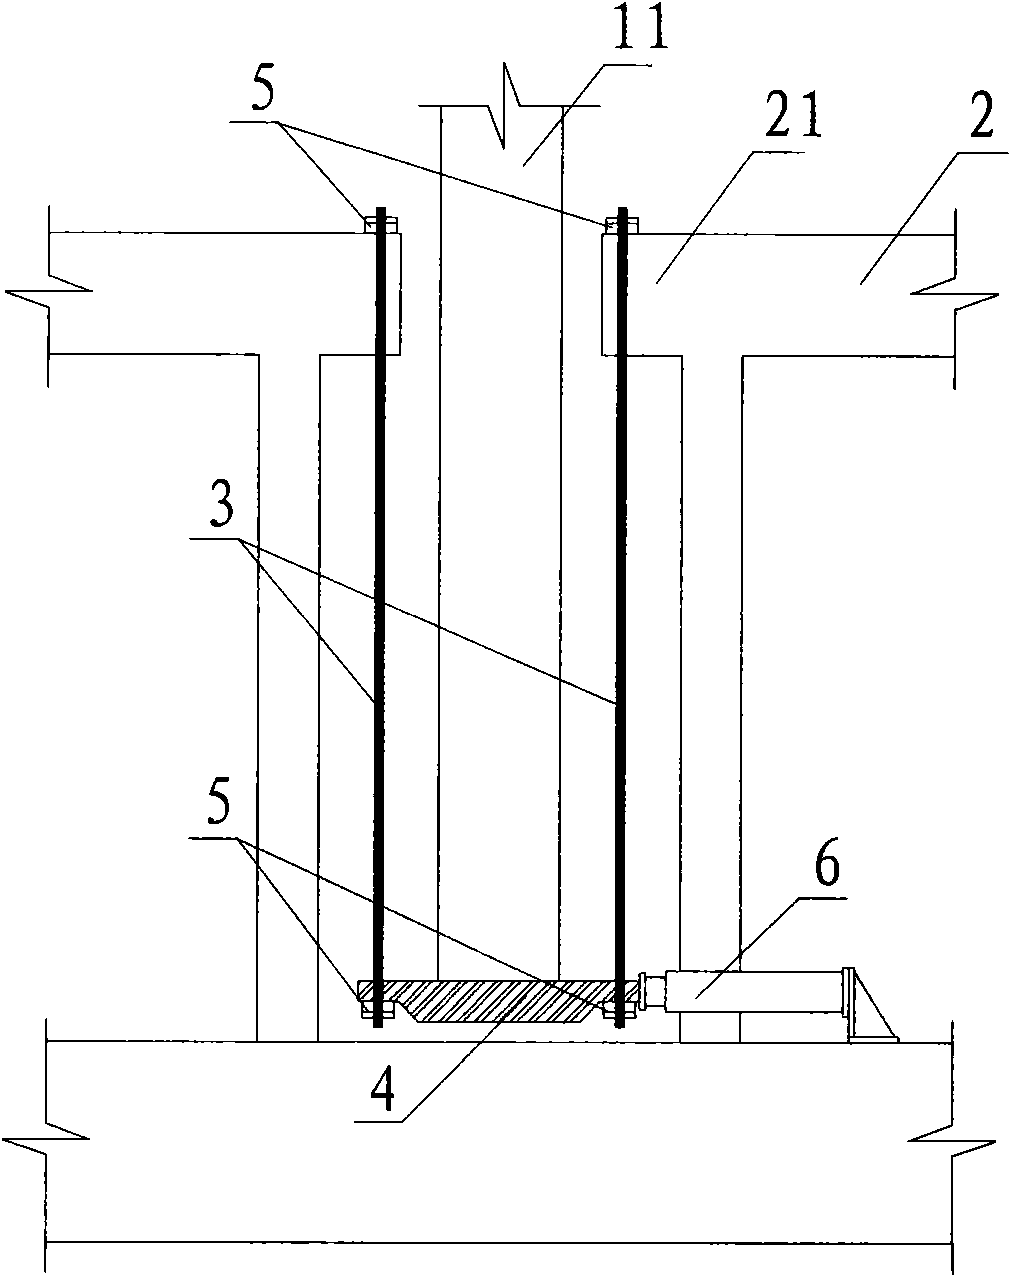 Integral hanging shock insulation building structure